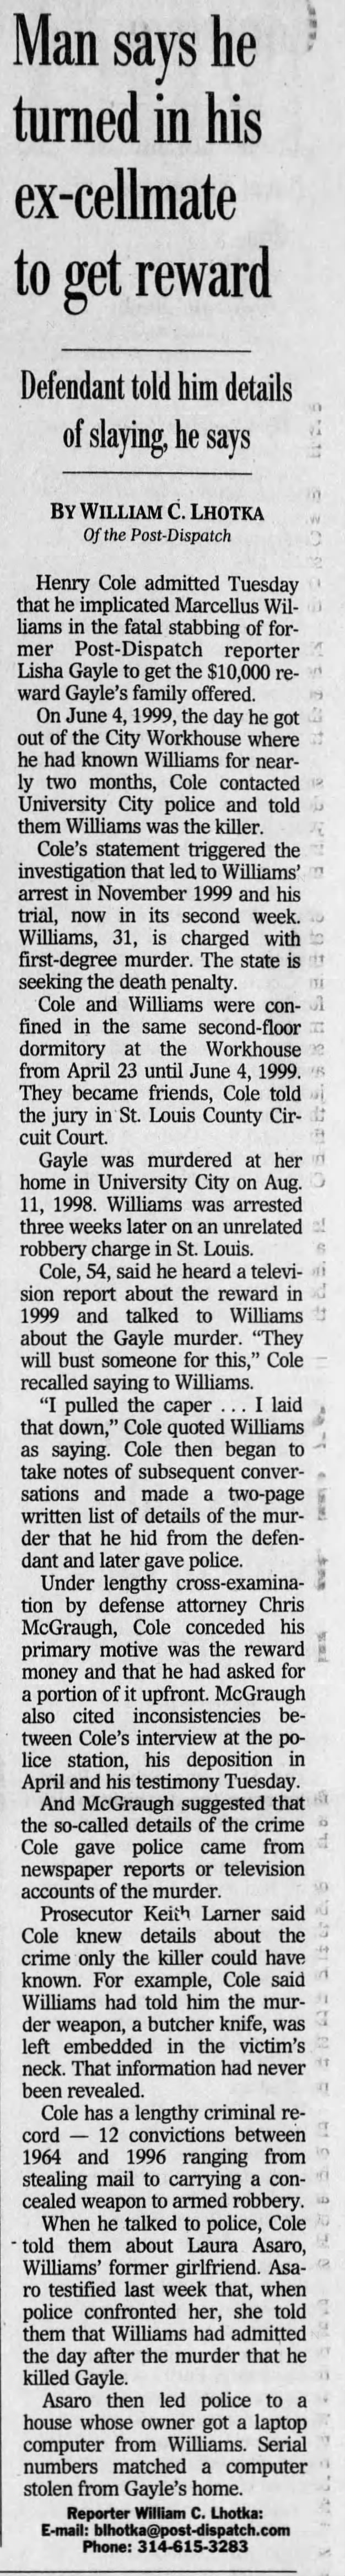 Lisha Gayle's murderer turned in by Cellmate to get reward of $10,000 dollars.